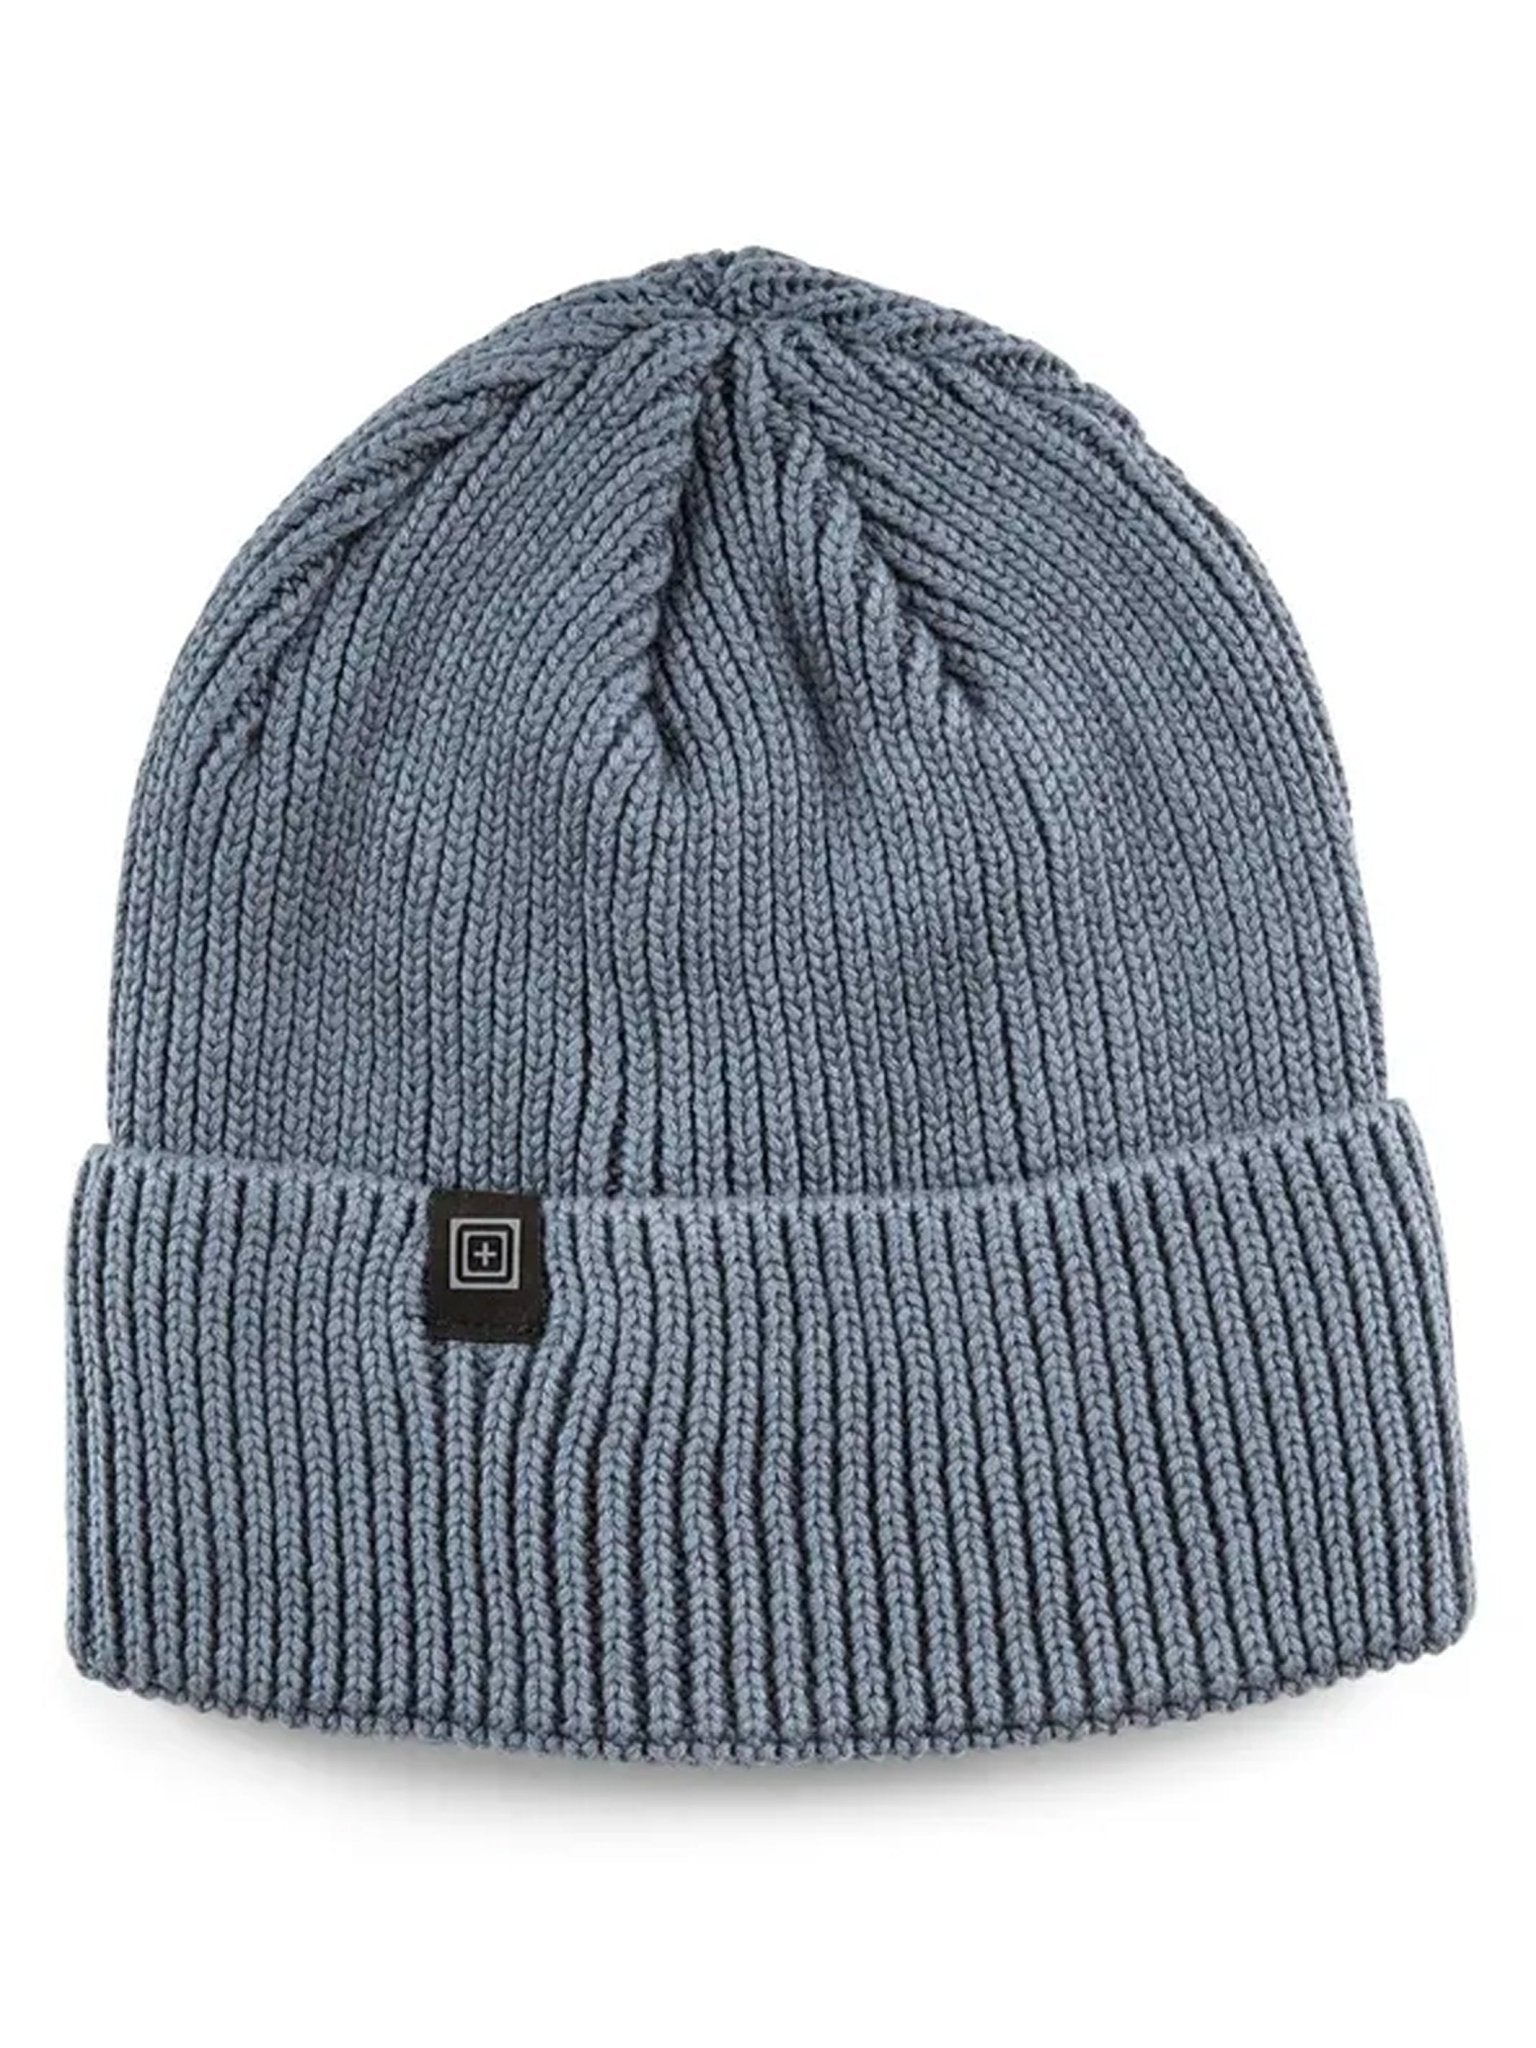 4elementsclothing5.11 Tactical5.11 Tactical - 5.11 Tactical Cotton Knitted Boistel Beanie Hat - Style 89163Hats89163-545